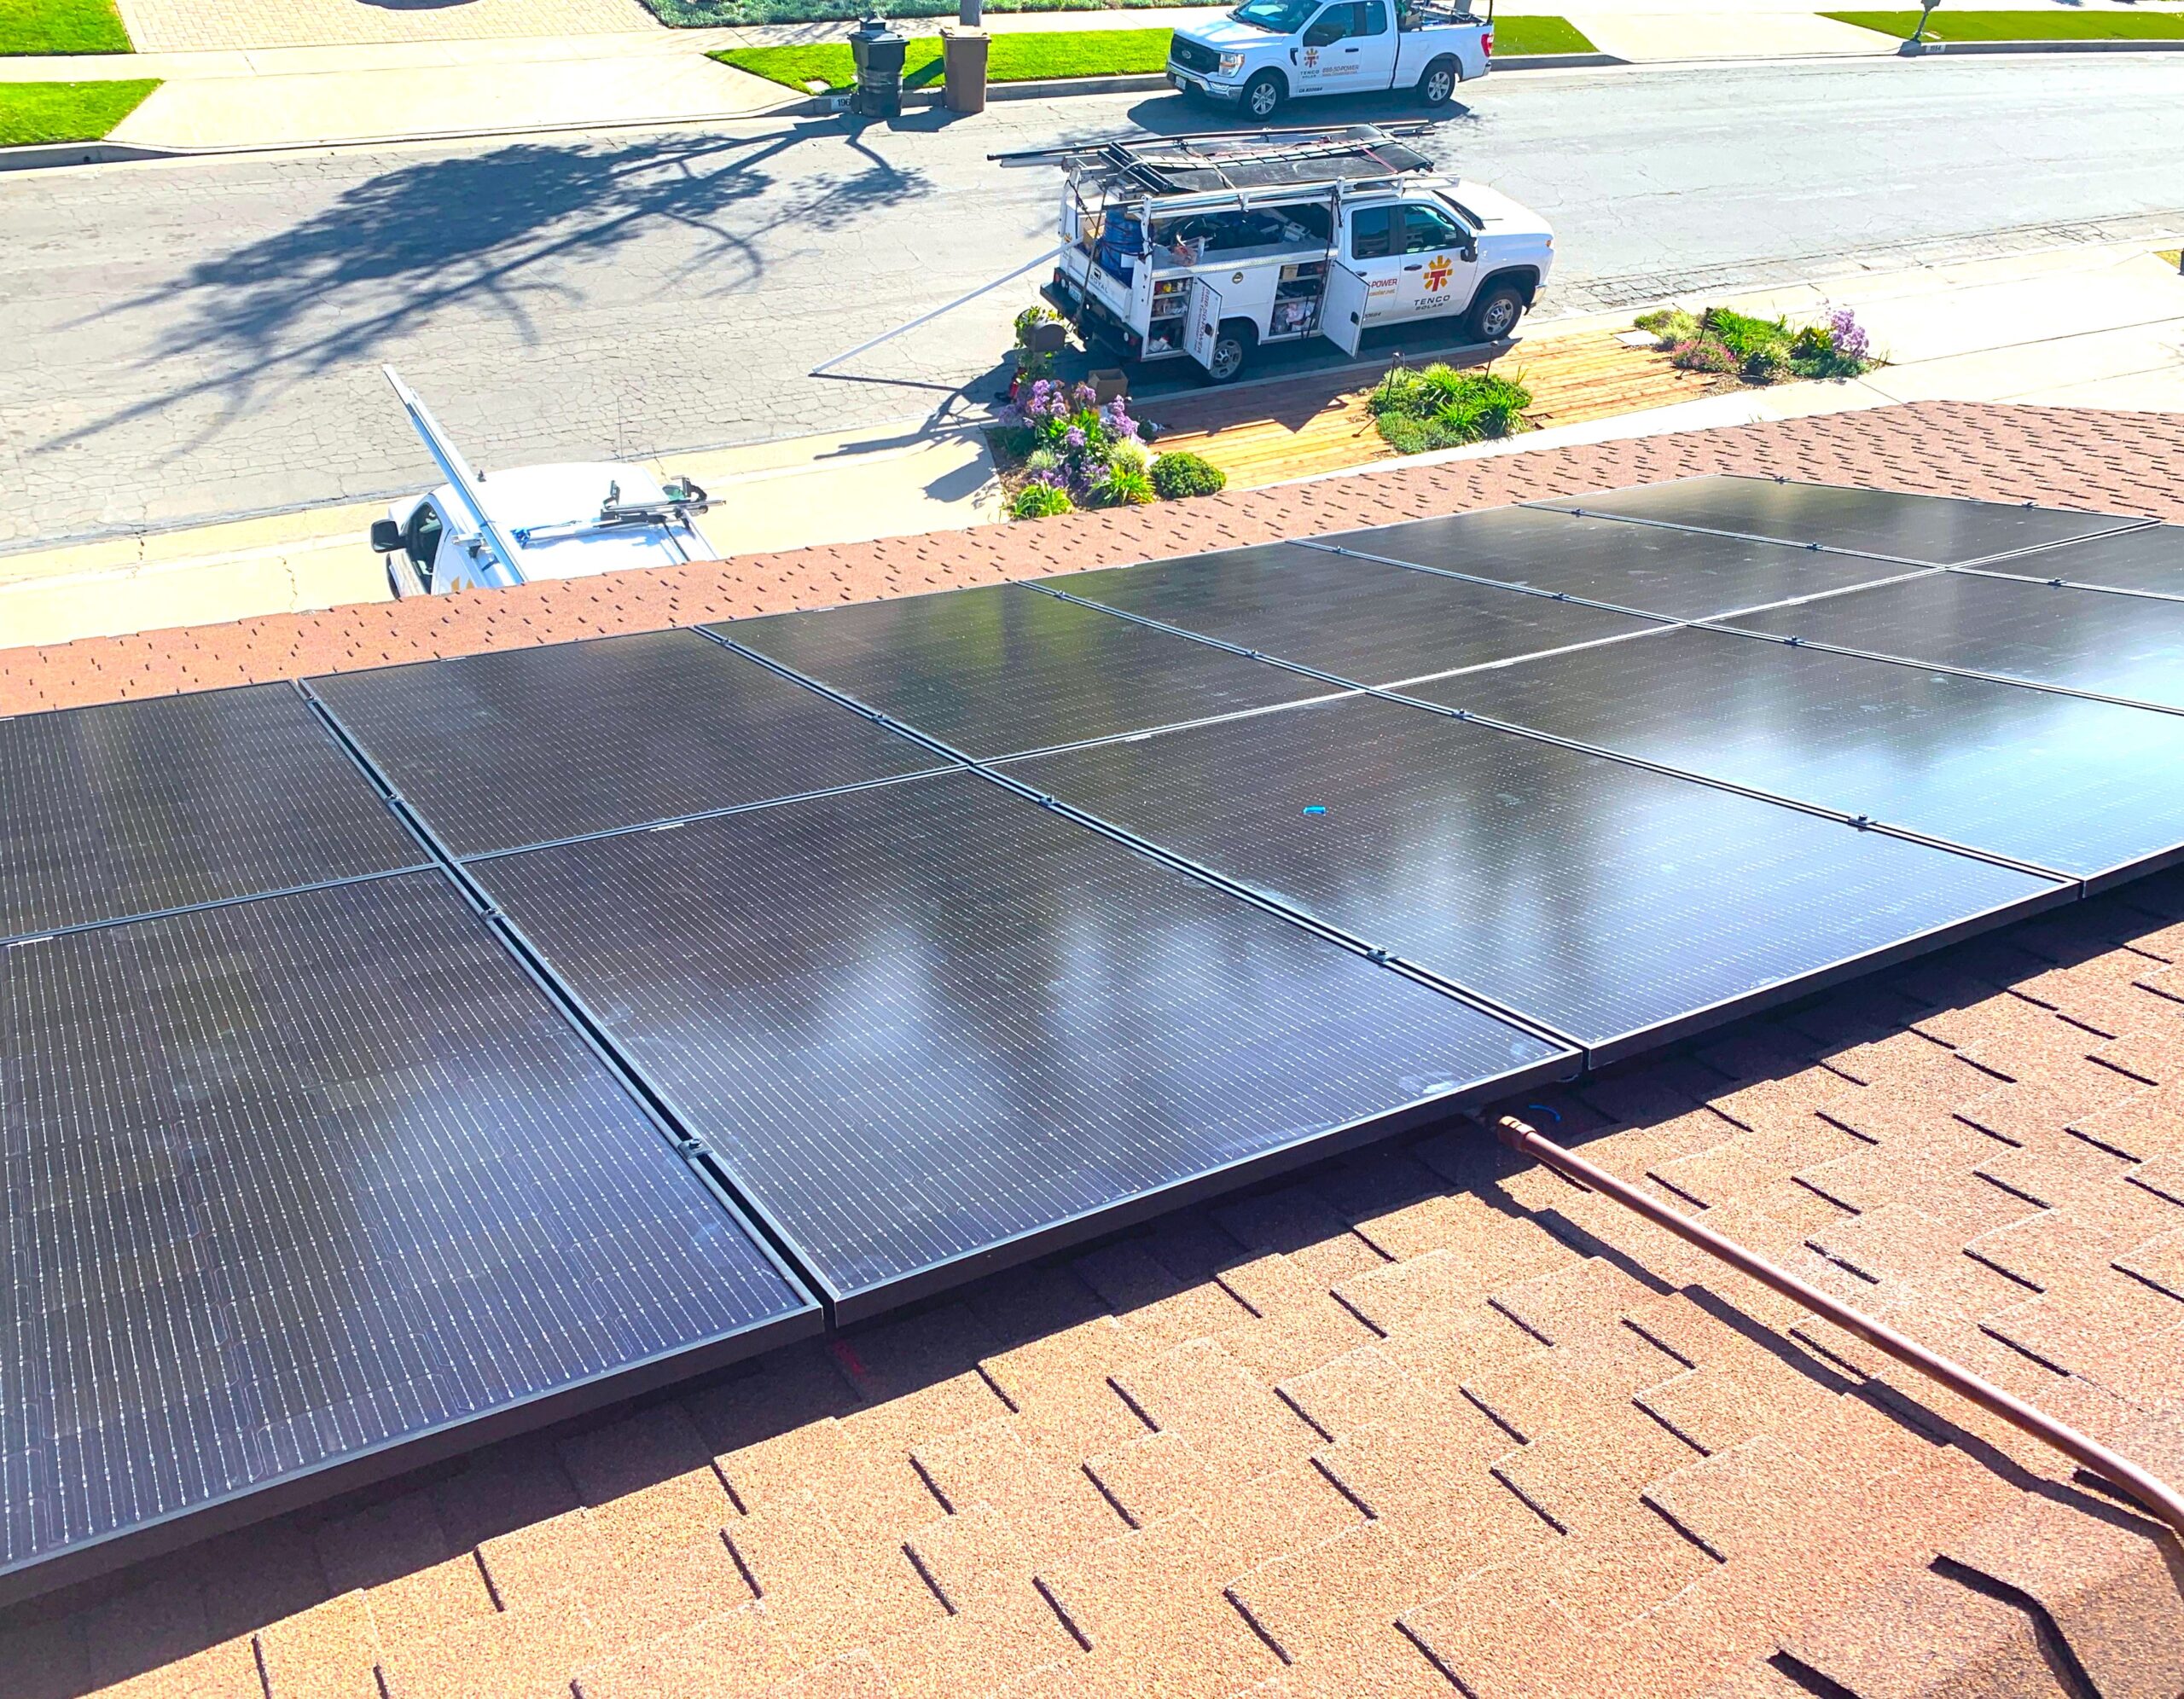 A close shot of solar panels on the roof of a house with a TENCO SOLAR service truck on the street below